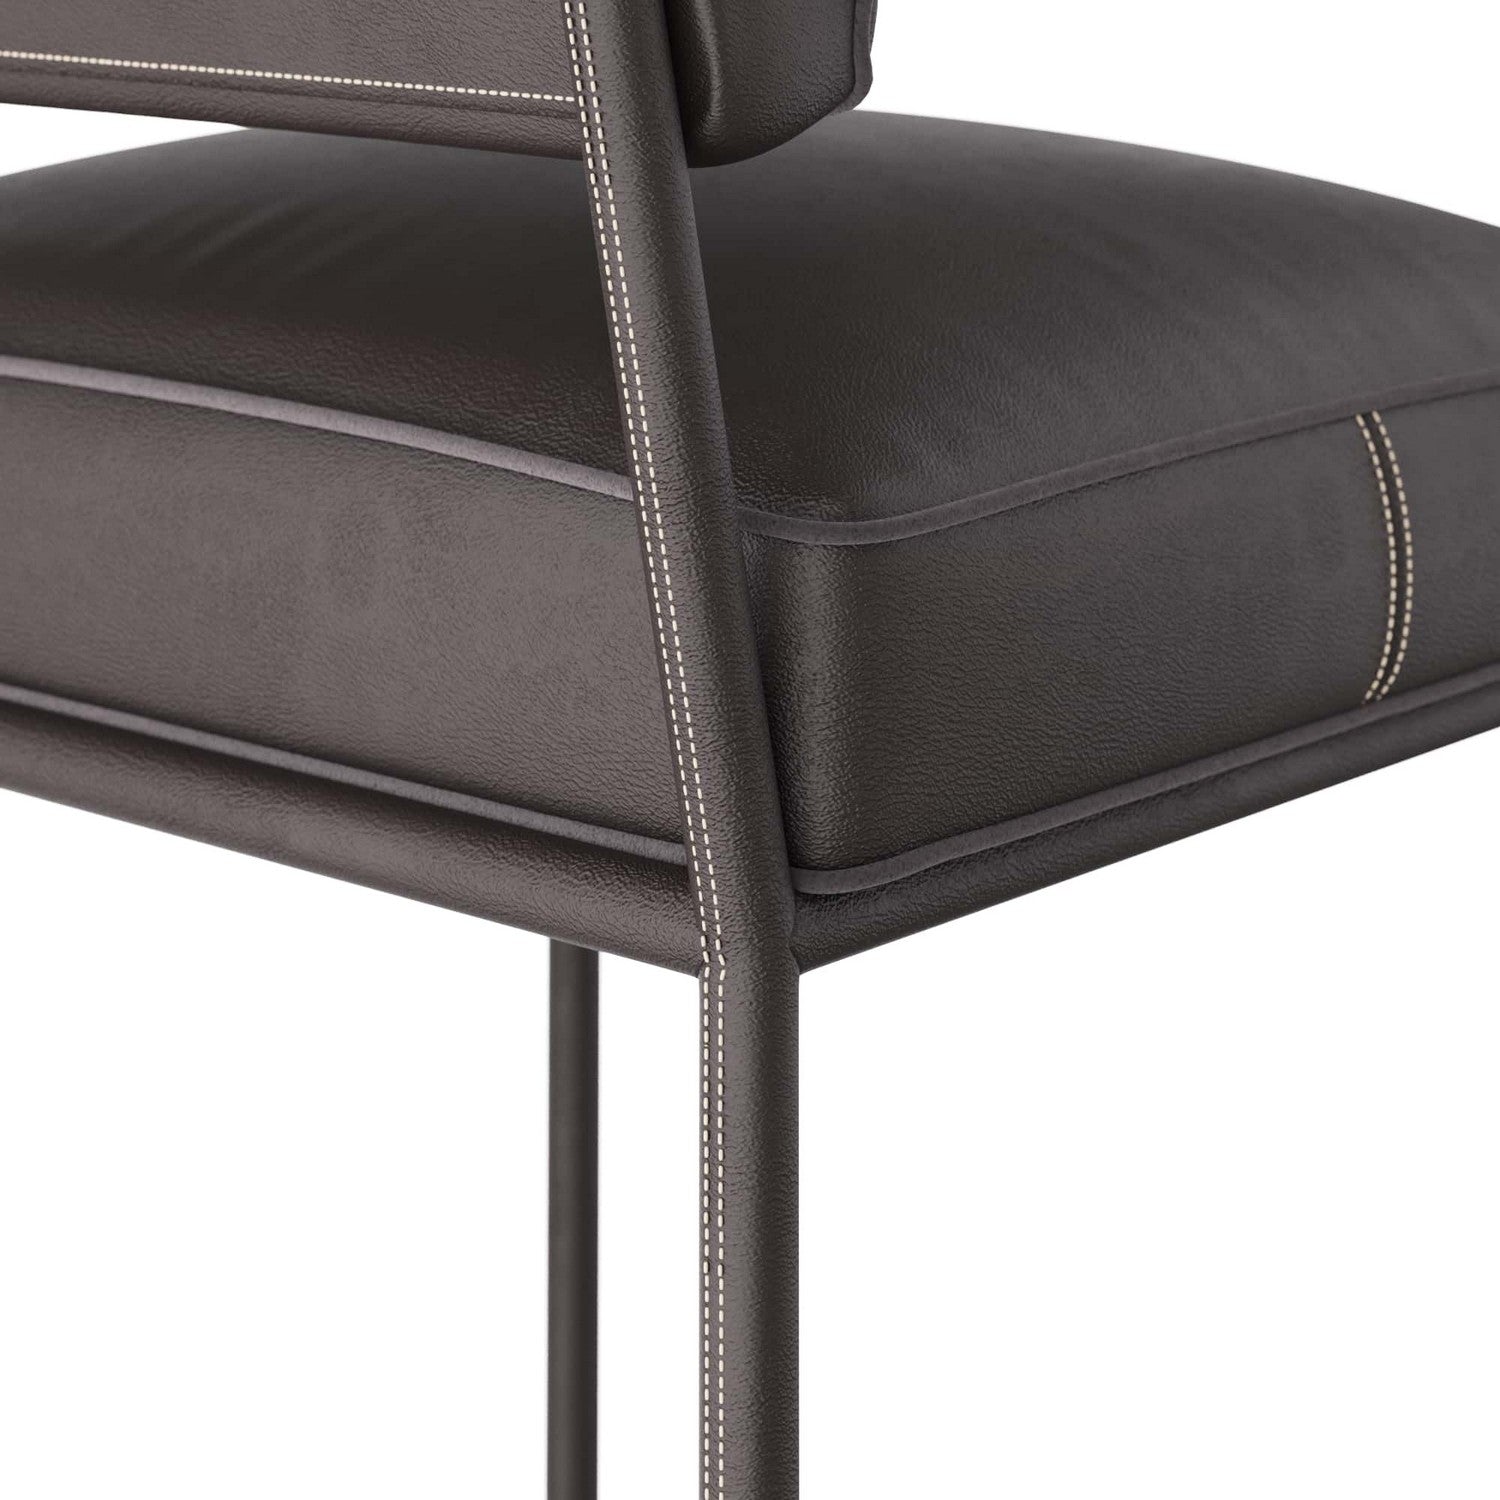 Counter Stool from the Topanga collection in Graphite finish